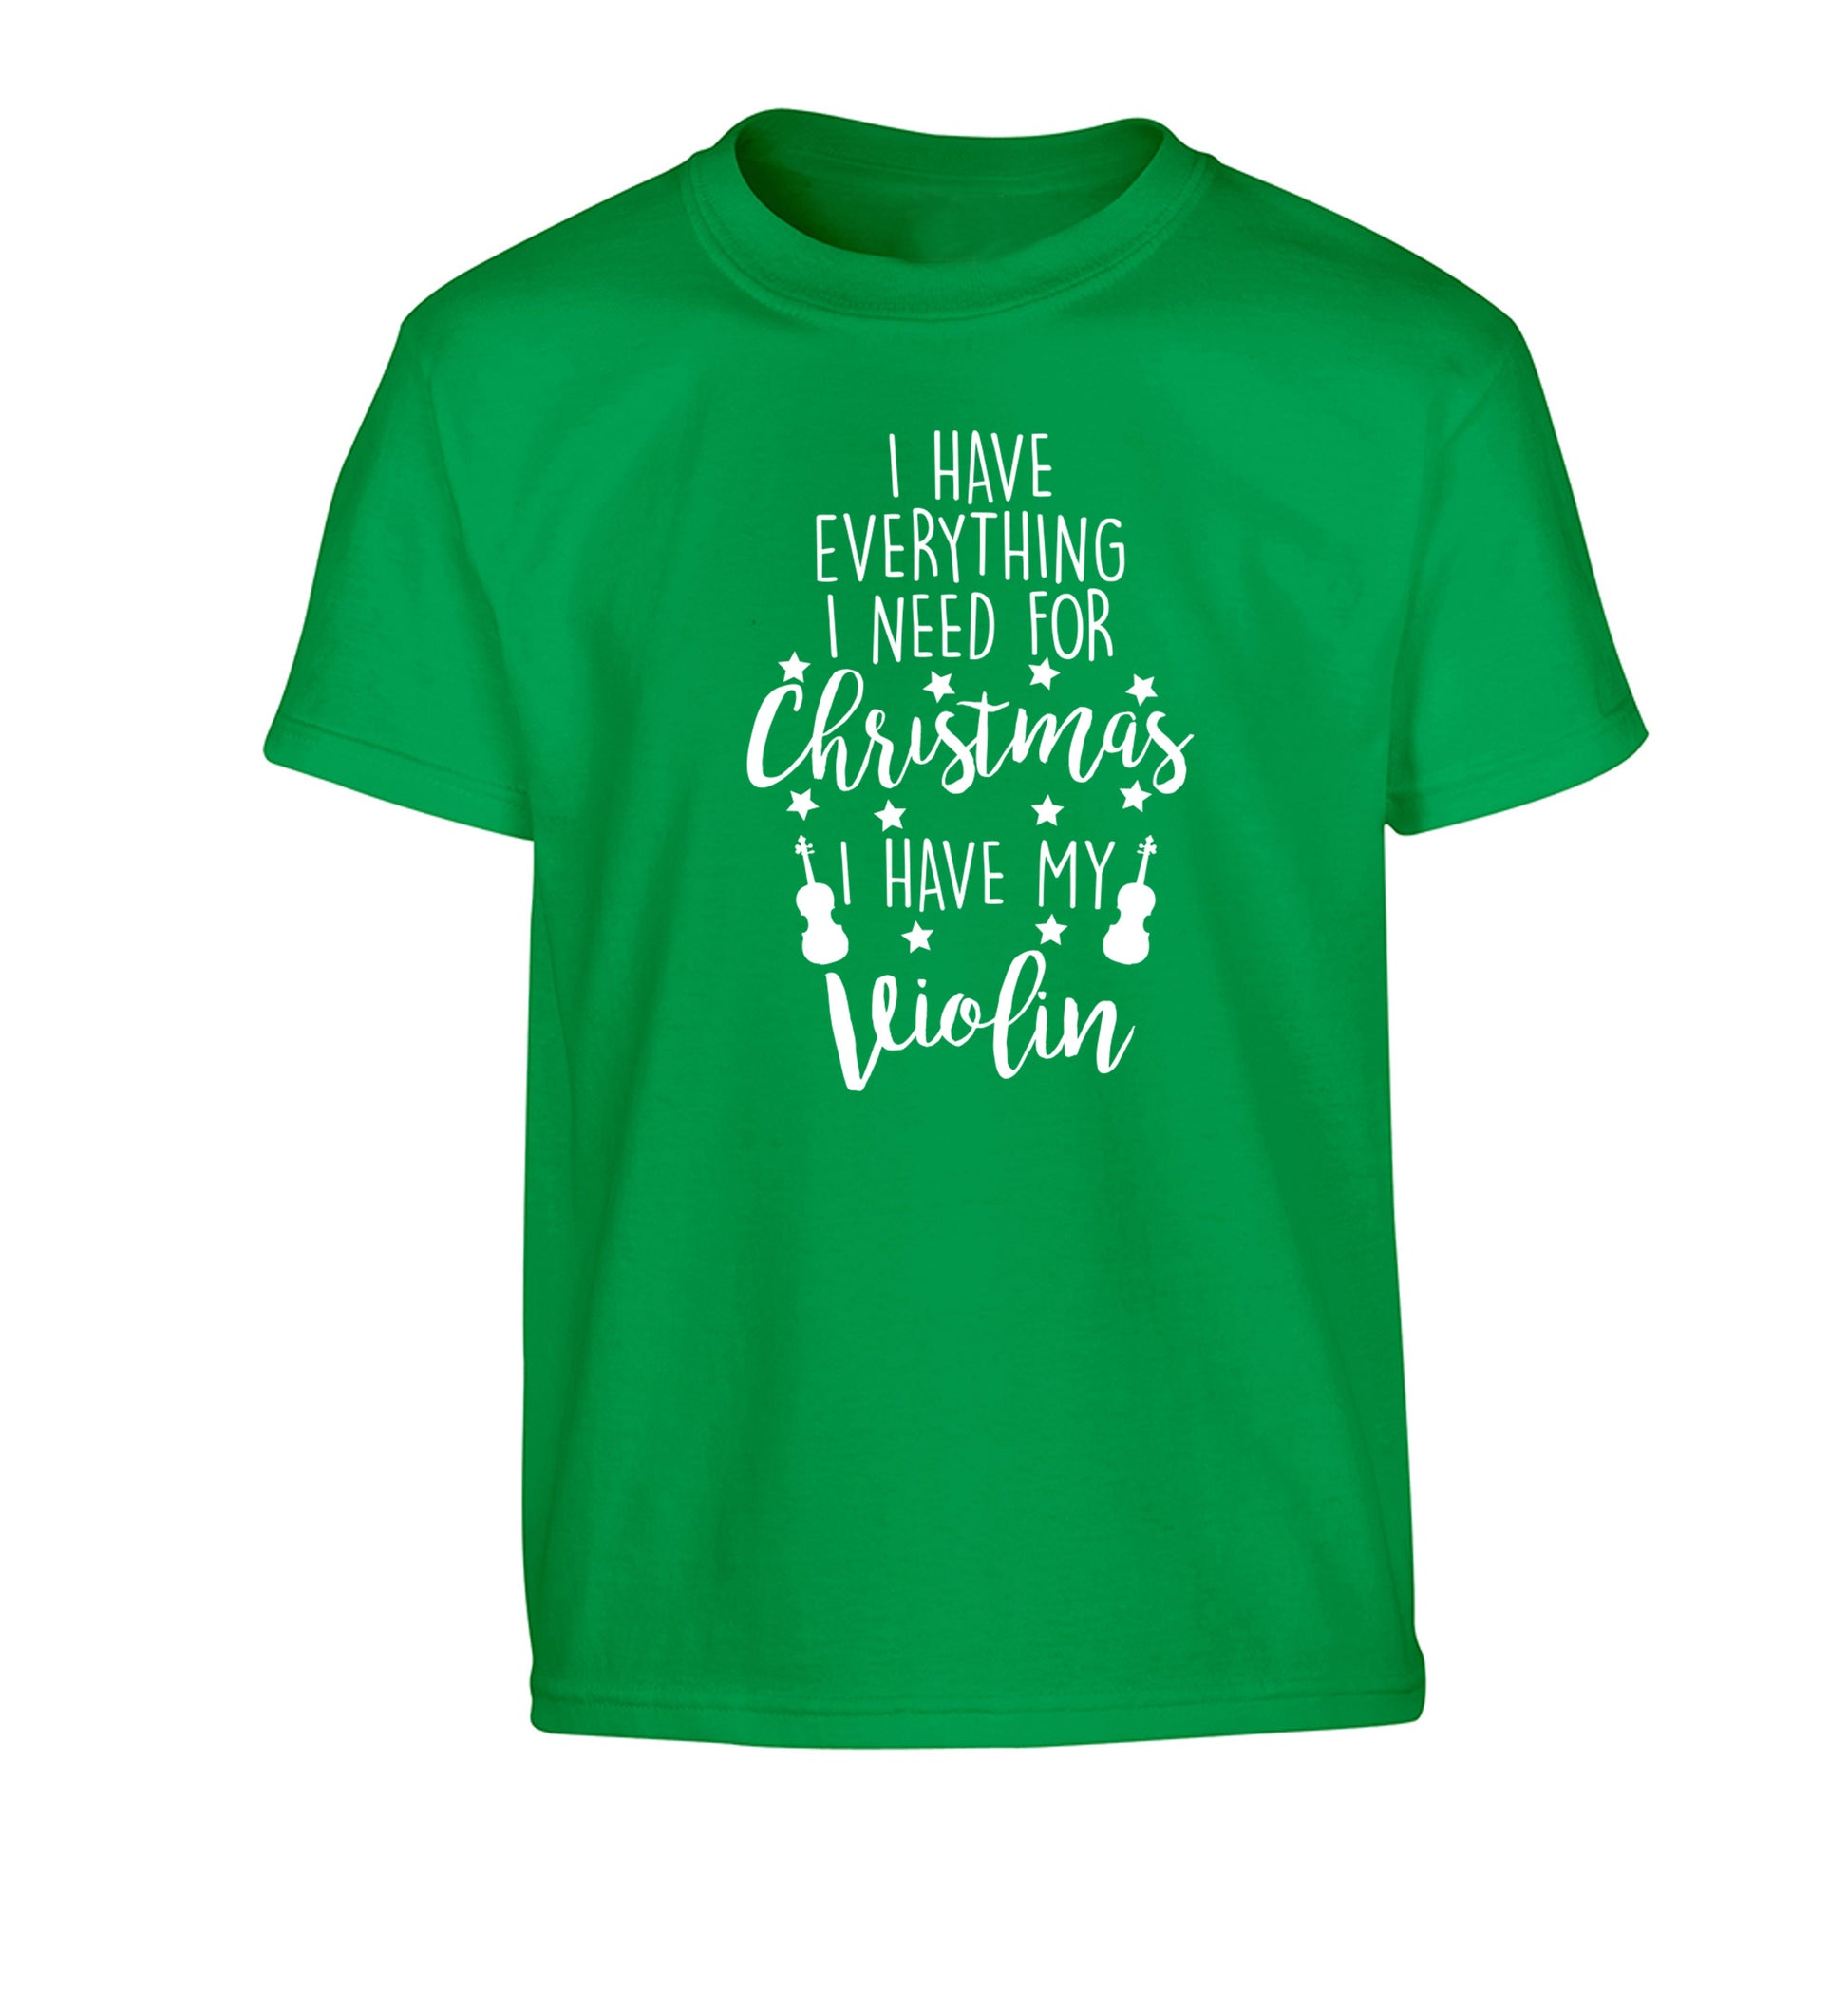 I have everything I need for Christmas I have my violin Children's green Tshirt 12-13 Years